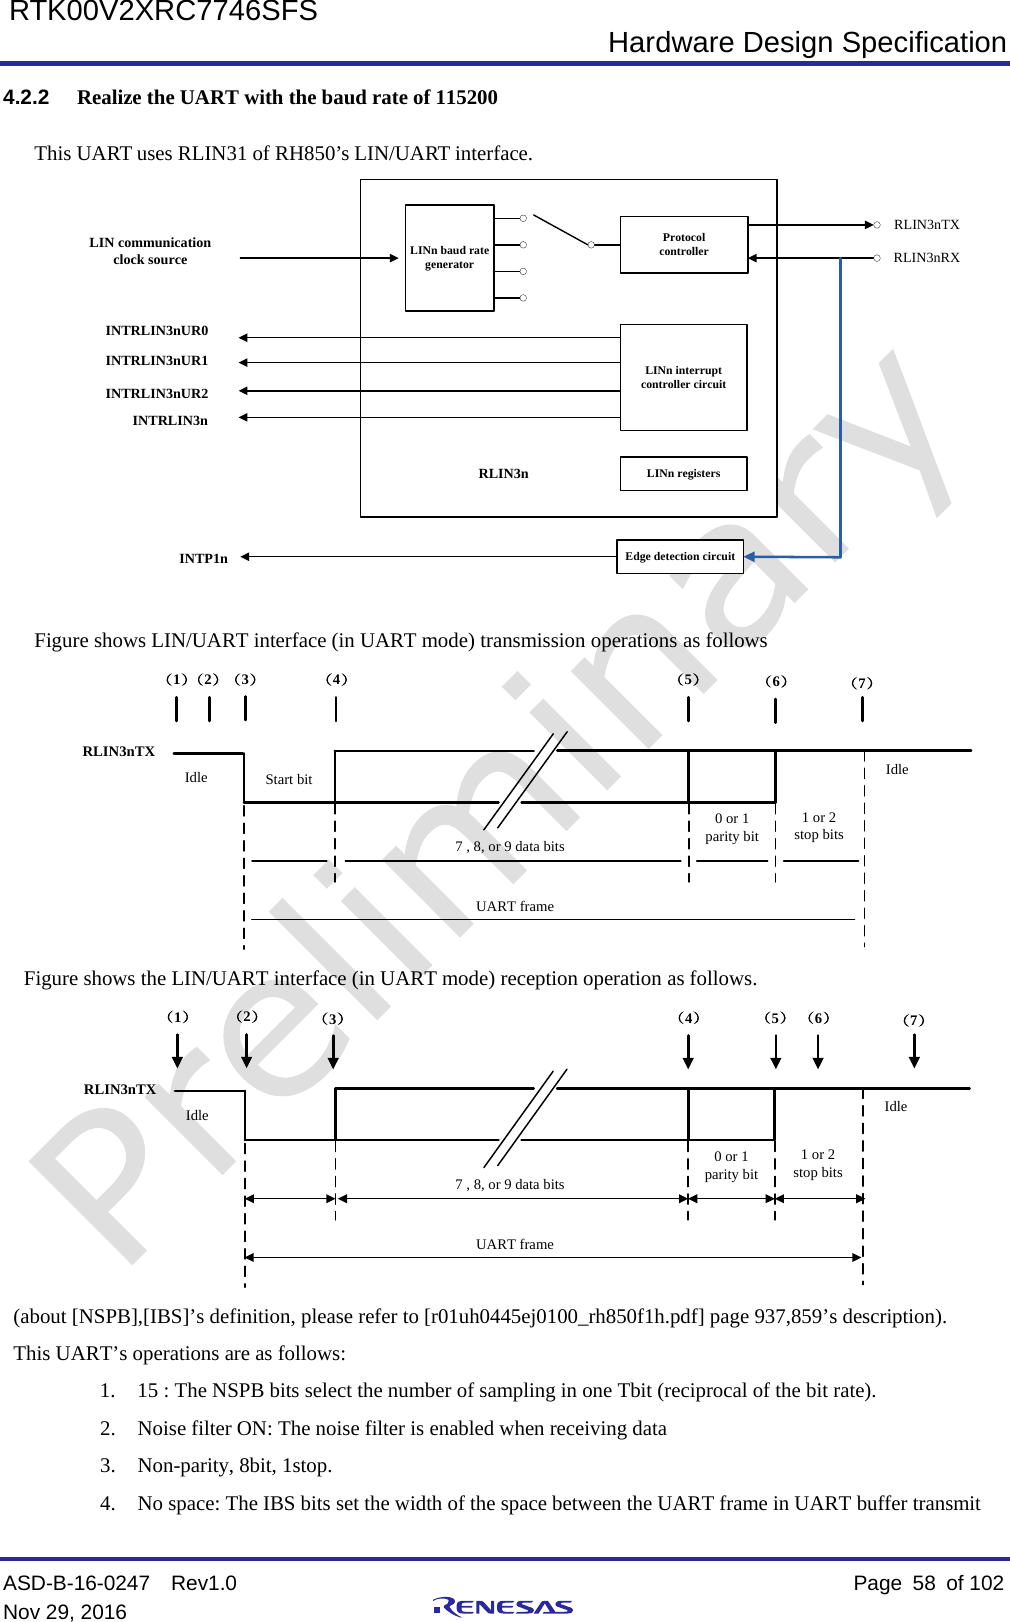  Hardware Design Specification ASD-B-16-0247  Rev1.0    Page  58 of 102 Nov 29, 2016     RTK00V2XRC7746SFS 4.2.2 Realize the UART with the baud rate of 115200 This UART uses RLIN31 of RH850’s LIN/UART interface. Edge detection circuitRLIN3nTXRLIN3nRXLINn registersLINn interruptcontroller circuitLINn baud rate generatorProtocol controllerLIN communication clock sourceINTRLIN3nUR0INTRLIN3nUR1INTRLIN3nUR2INTRLIN3nINTP1nRLIN3n  Figure shows LIN/UART interface (in UART mode) transmission operations as follows Start bit（1）（2）（3） （4） （5）（6）（7）Idle Idle7 , 8, or 9 data bits0 or 1 parity bit1 or 2 stop bitsUART frameRLIN3nTX   Figure shows the LIN/UART interface (in UART mode) reception operation as follows. （1）（2）（3）（4） （5）（6）（7）Idle Idle7 , 8, or 9 data bits0 or 1 parity bit1 or 2 stop bitsUART frameRLIN3nTX (about [NSPB],[IBS]’s definition, please refer to [r01uh0445ej0100_rh850f1h.pdf] page 937,859’s description). This UART’s operations are as follows: 1. 15 : The NSPB bits select the number of sampling in one Tbit (reciprocal of the bit rate). 2. Noise filter ON: The noise filter is enabled when receiving data 3. Non-parity, 8bit, 1stop. 4. No space: The IBS bits set the width of the space between the UART frame in UART buffer transmit 